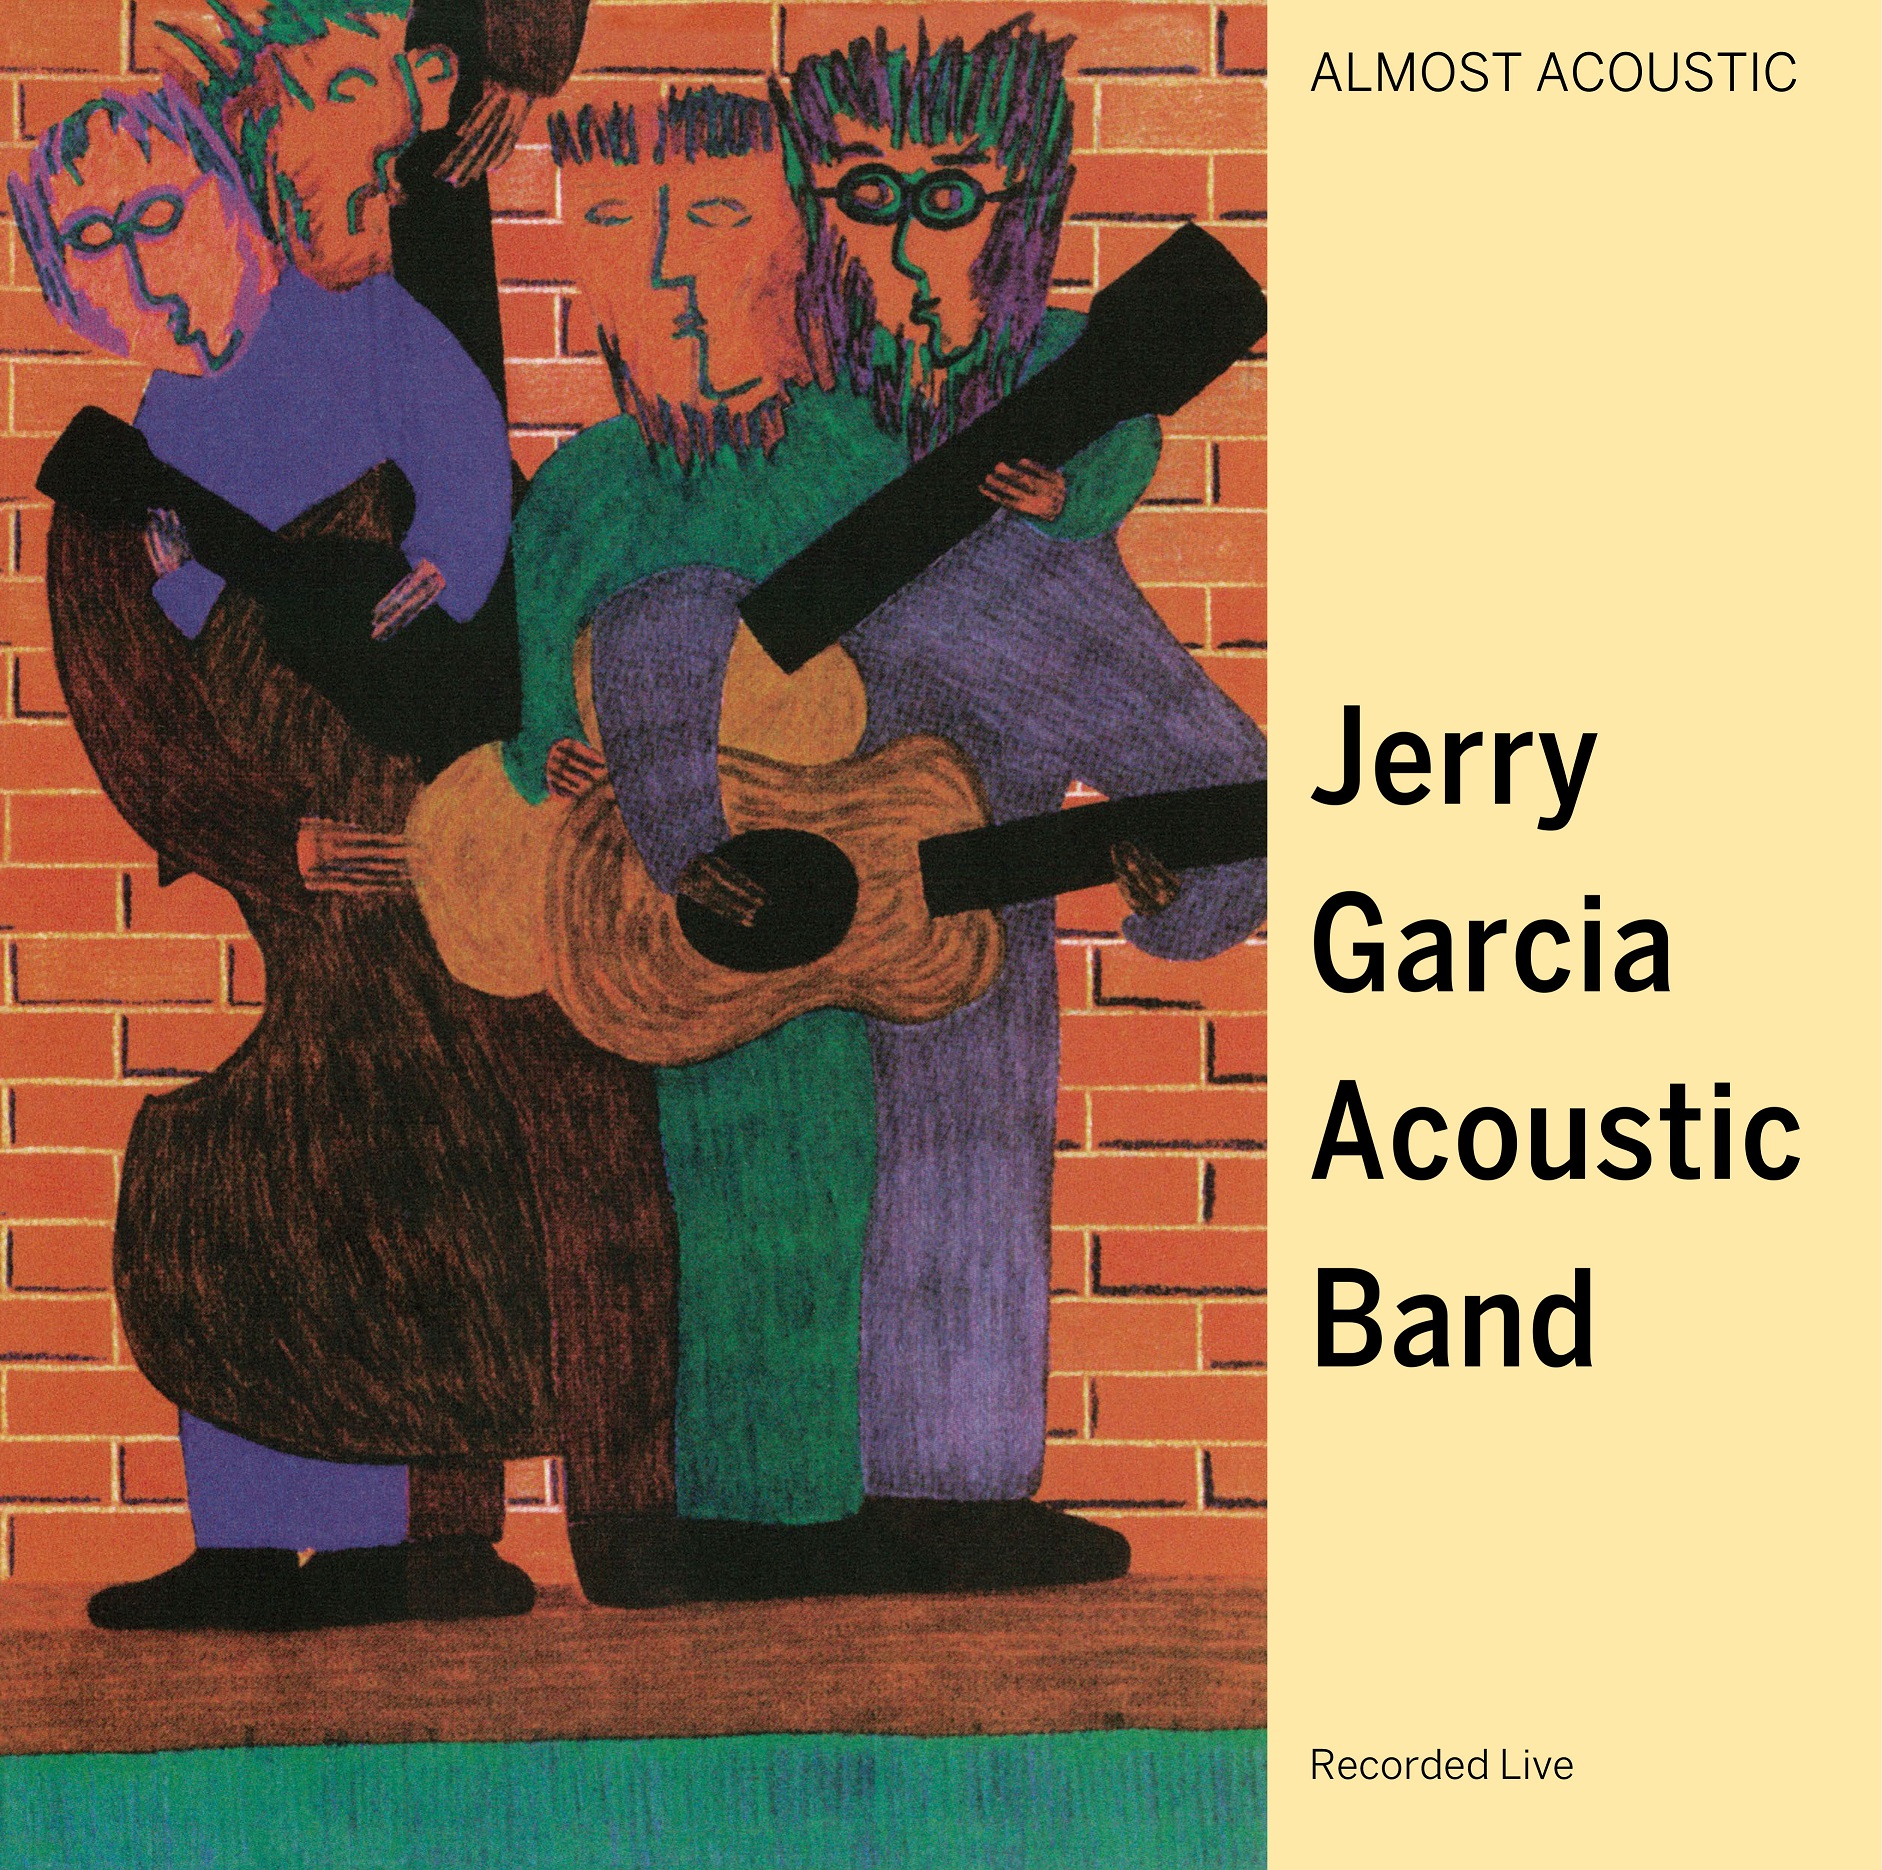 Jerry Garcia Acoustic Band "Almost Acoustic" Special Re-issue for Record Store Day, Nov. 23rd